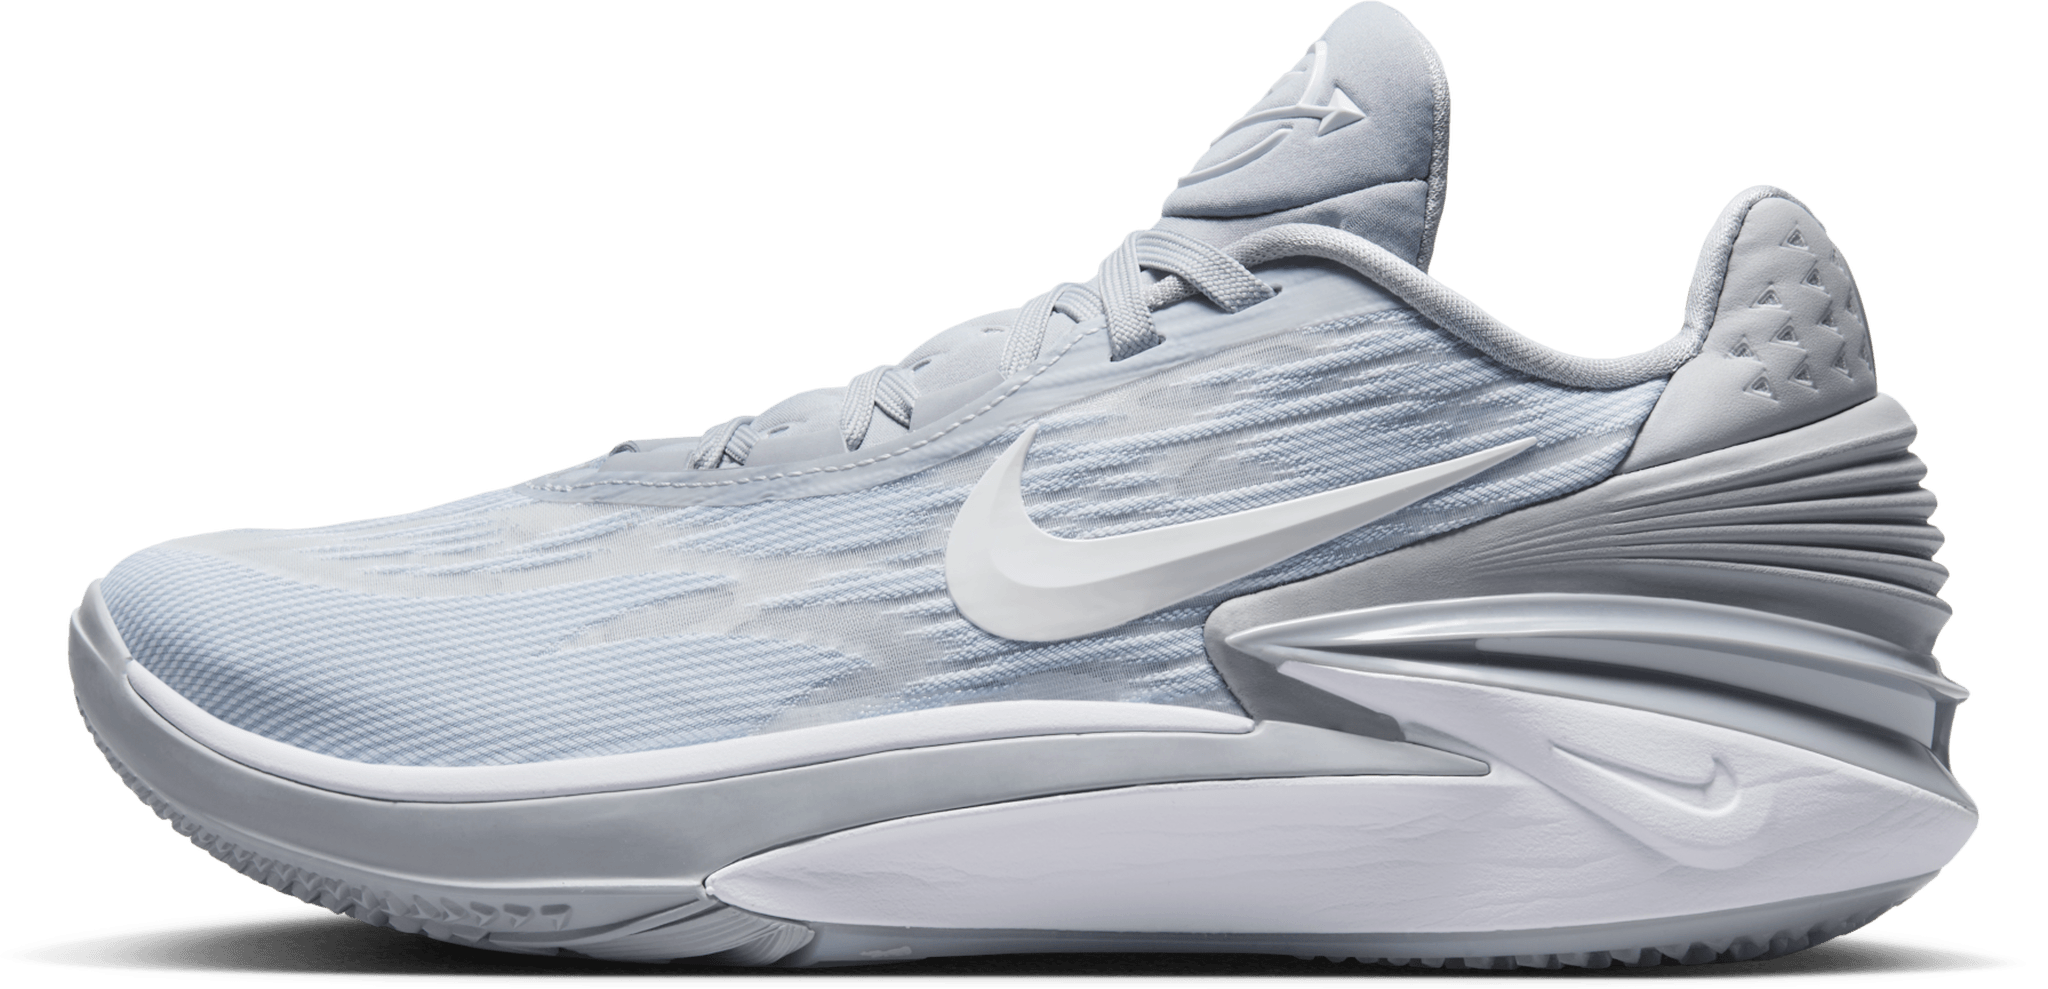 Nike Air Zoom G.T. Cut 2 Colorways - 21 Styles Starting from $61.97